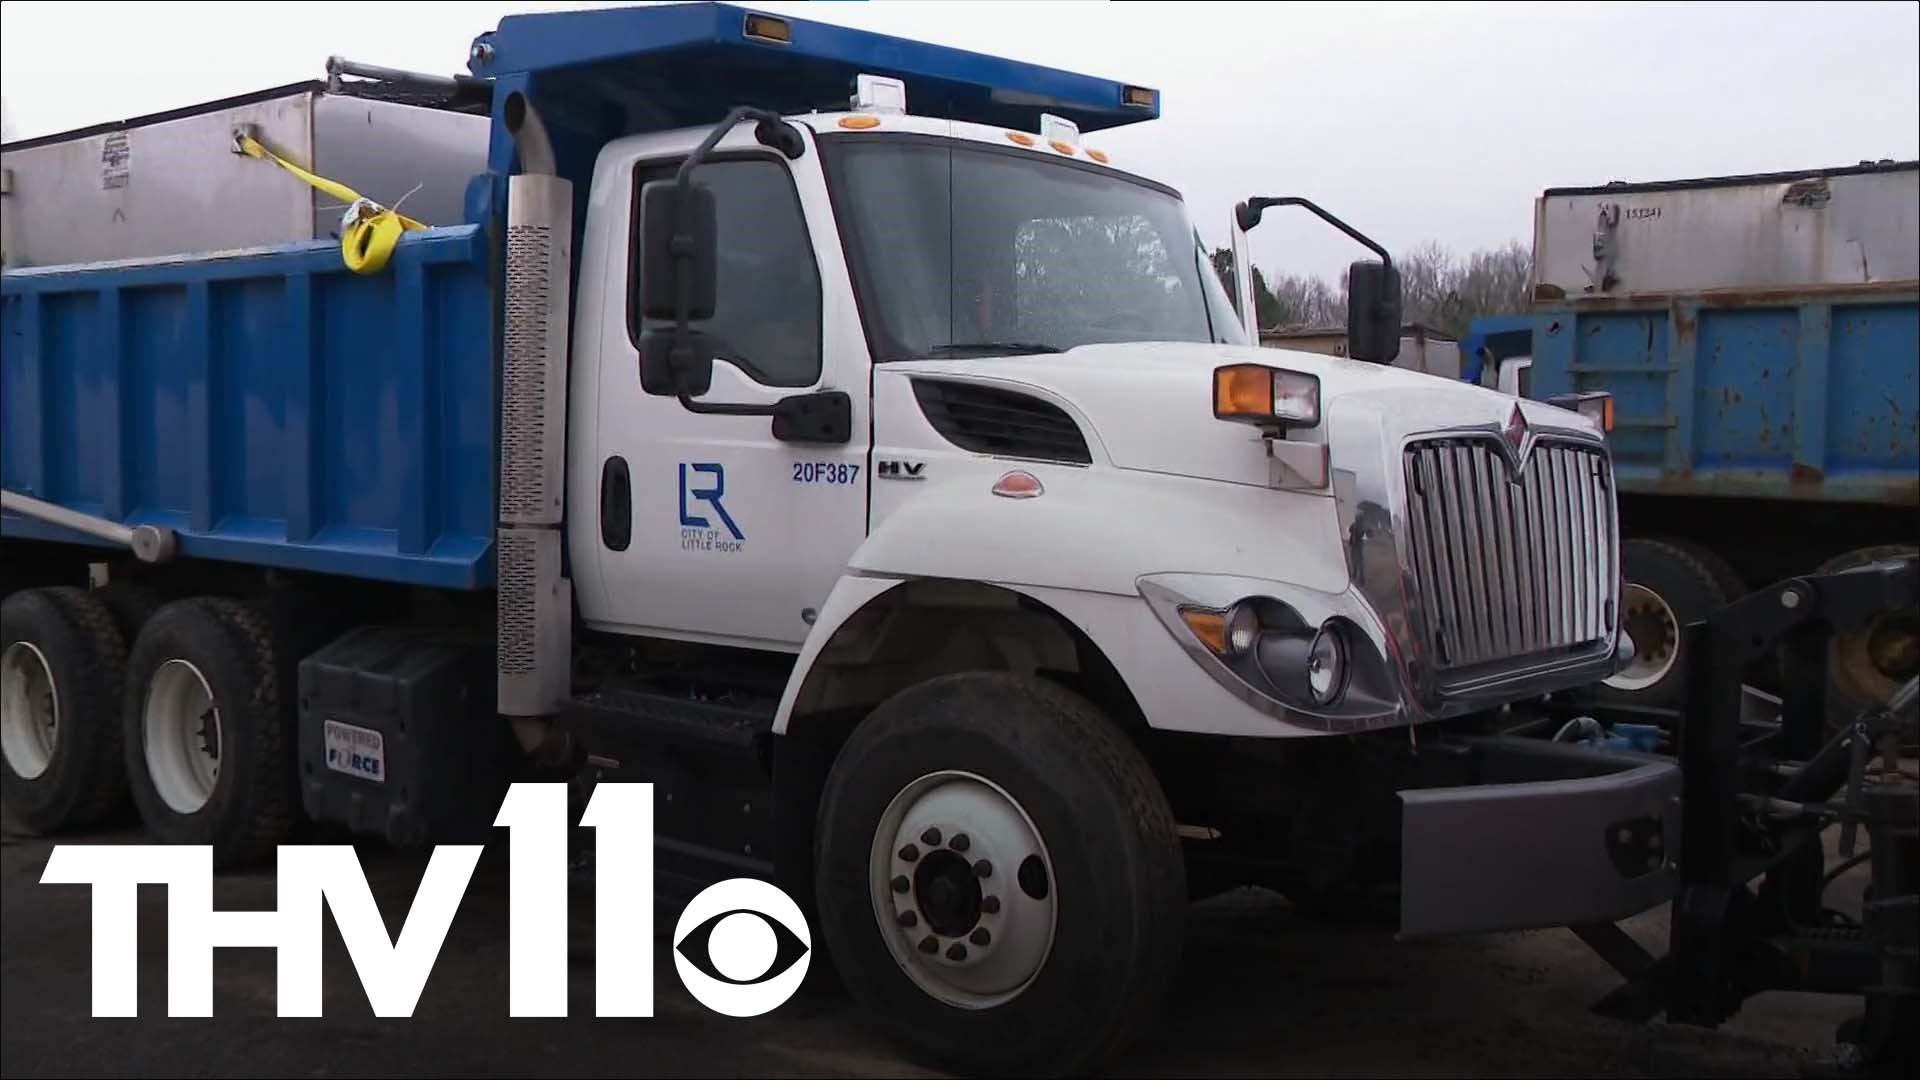 Arkansas crews have said that they're ready for winter weather in the state, even if the ice came a little earlier than expected.